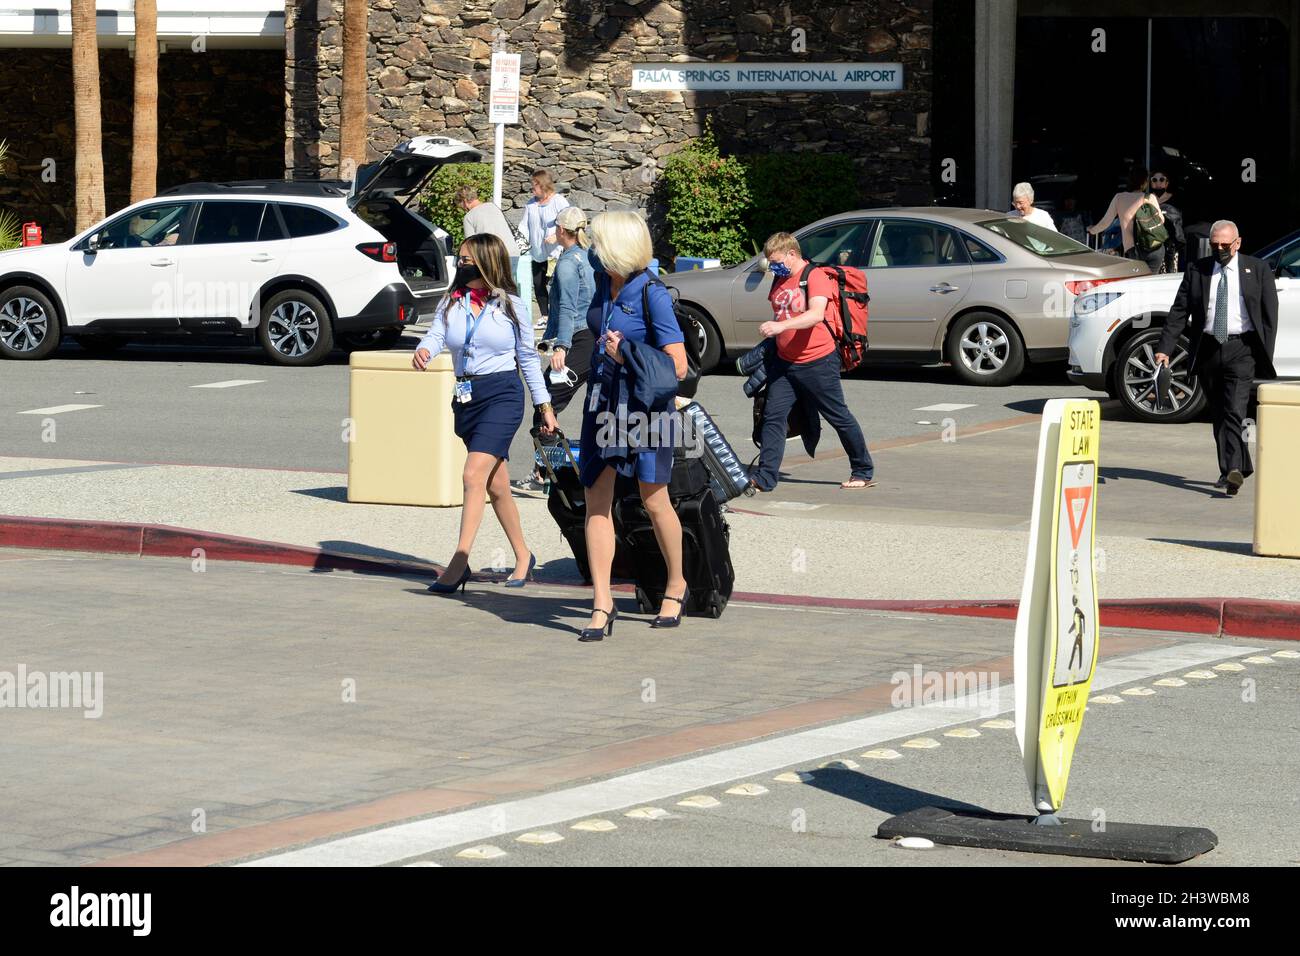 Southwest Airlines female flight crew exiting the Palm Springs International Airport, after a flight. Stock Photo